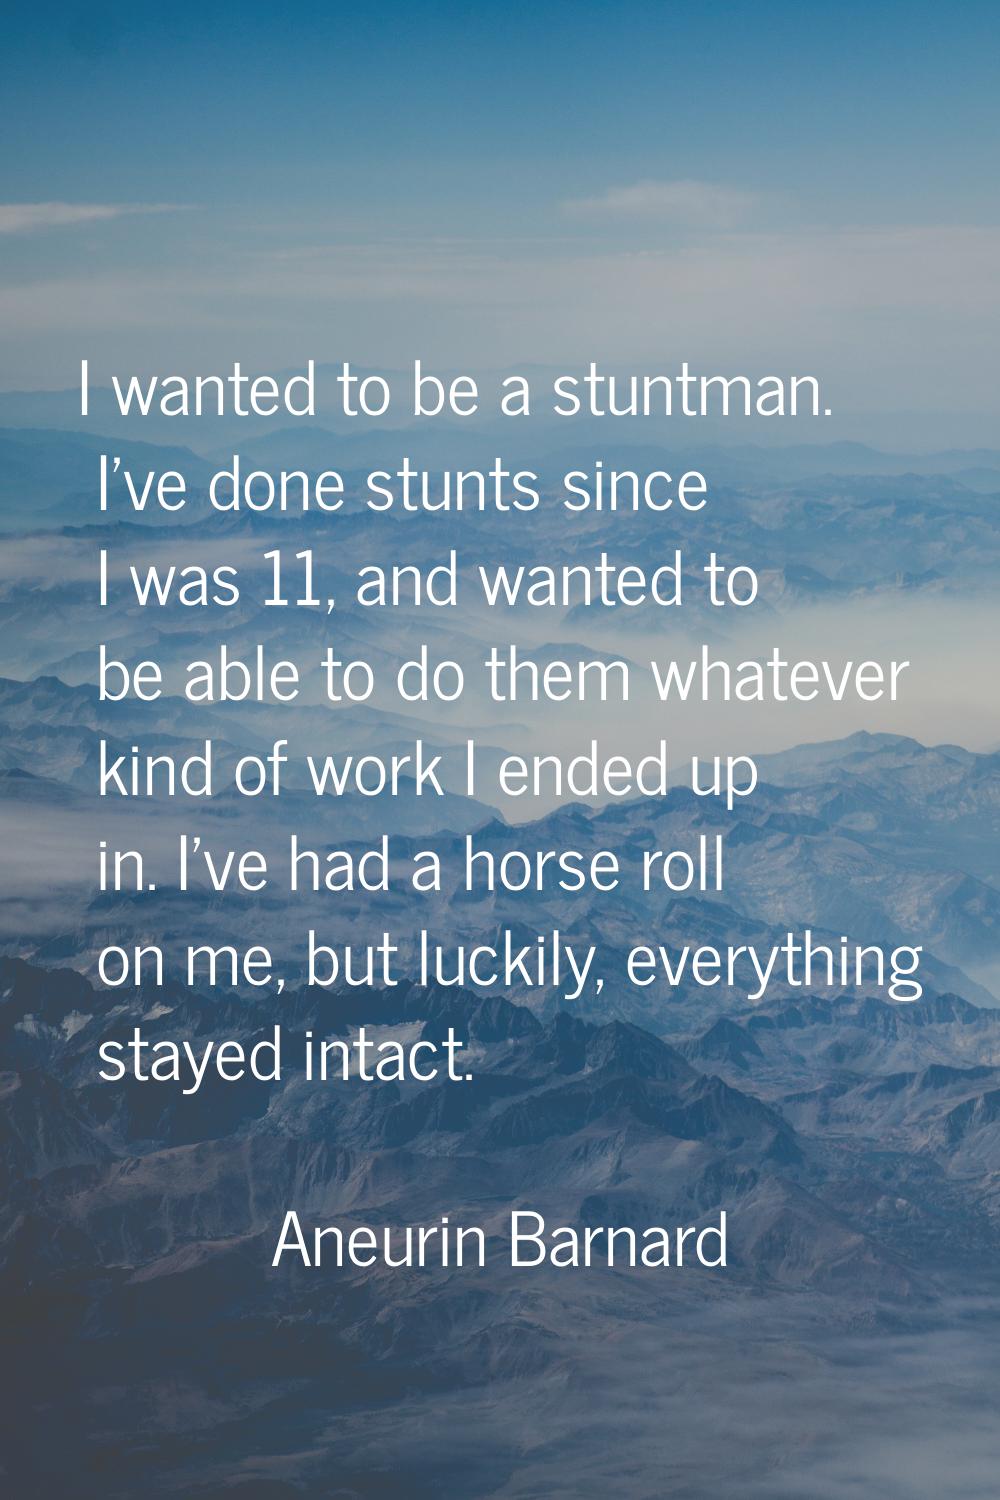 I wanted to be a stuntman. I've done stunts since I was 11, and wanted to be able to do them whatev